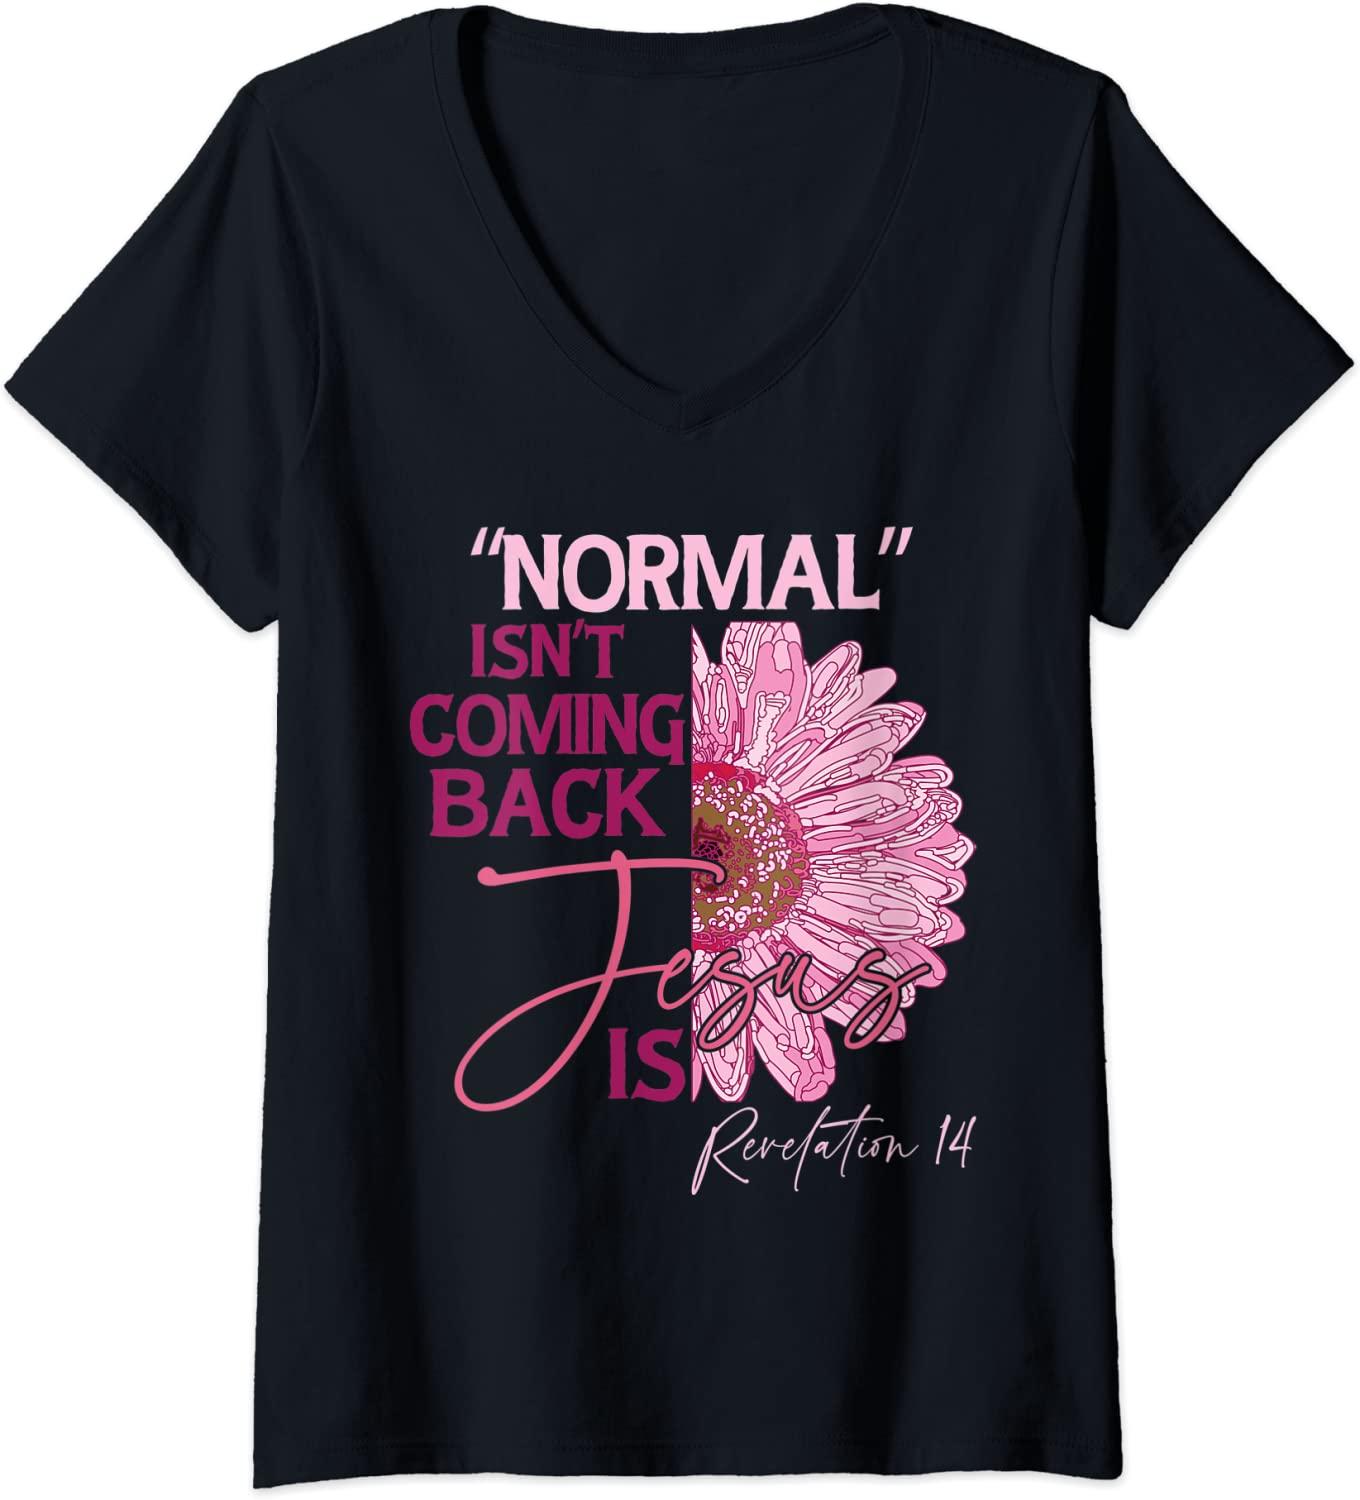 Womens Normal Isn't Coming Back Jesus Is V-Neck T-Shirt Best Price